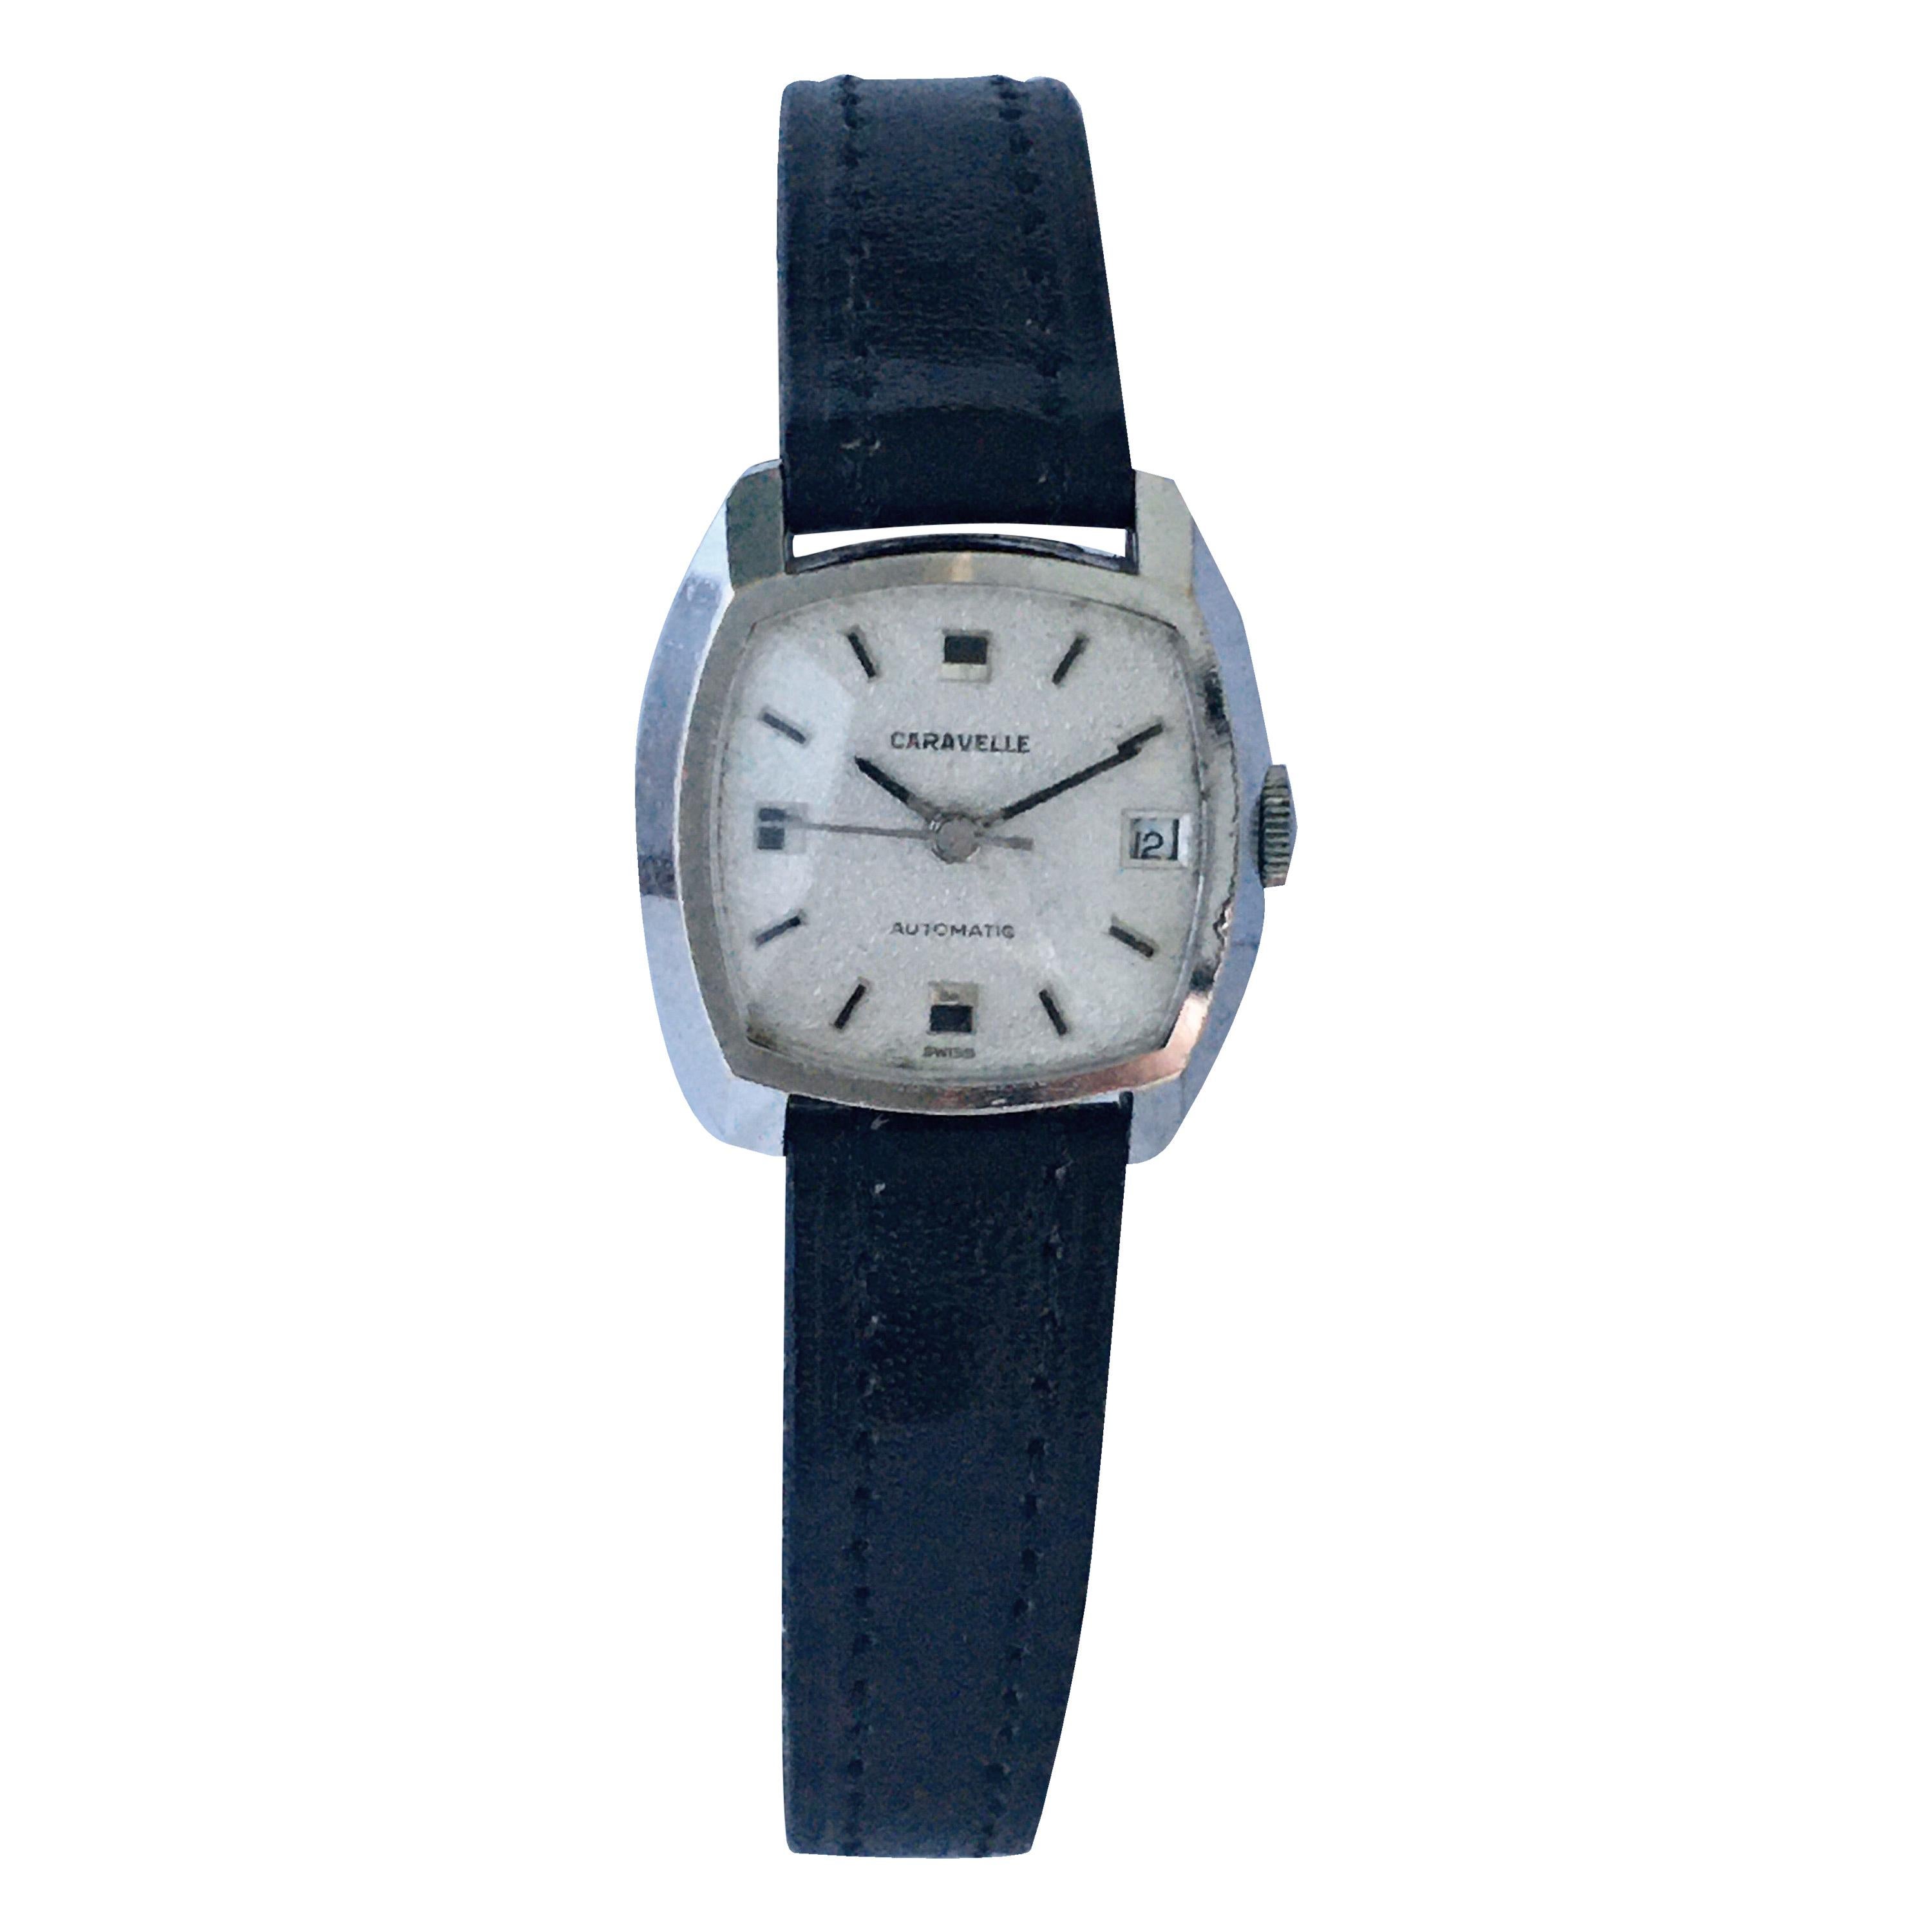 Vintage 1970s Caravelle Automatic Ladies Swiss Watch For Sale